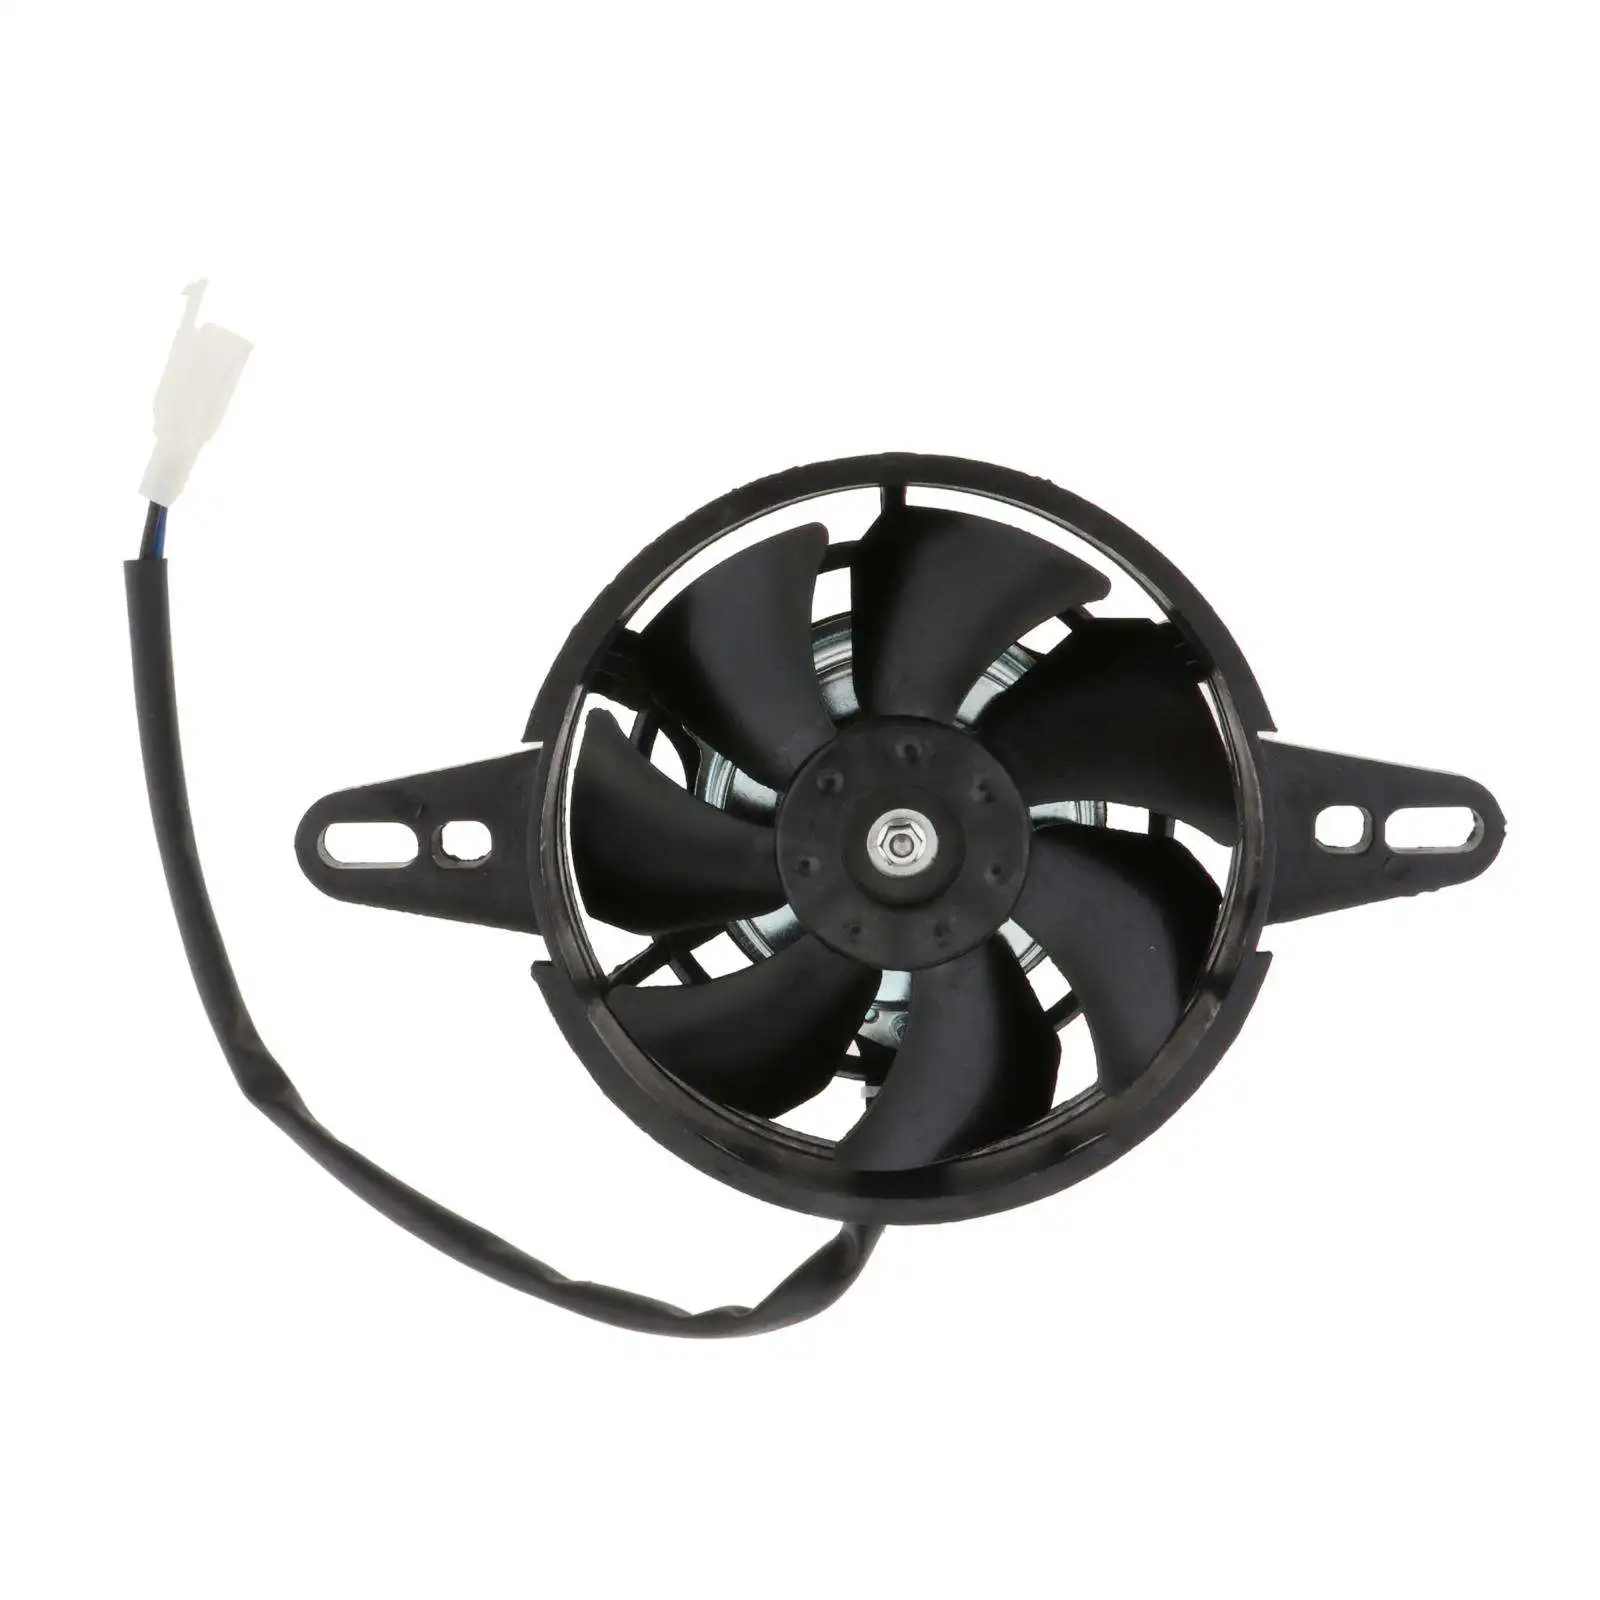 Electric Engine Radiator Cooling Fan for 150CC 200CC 250CC ATV,High Revolving Speed